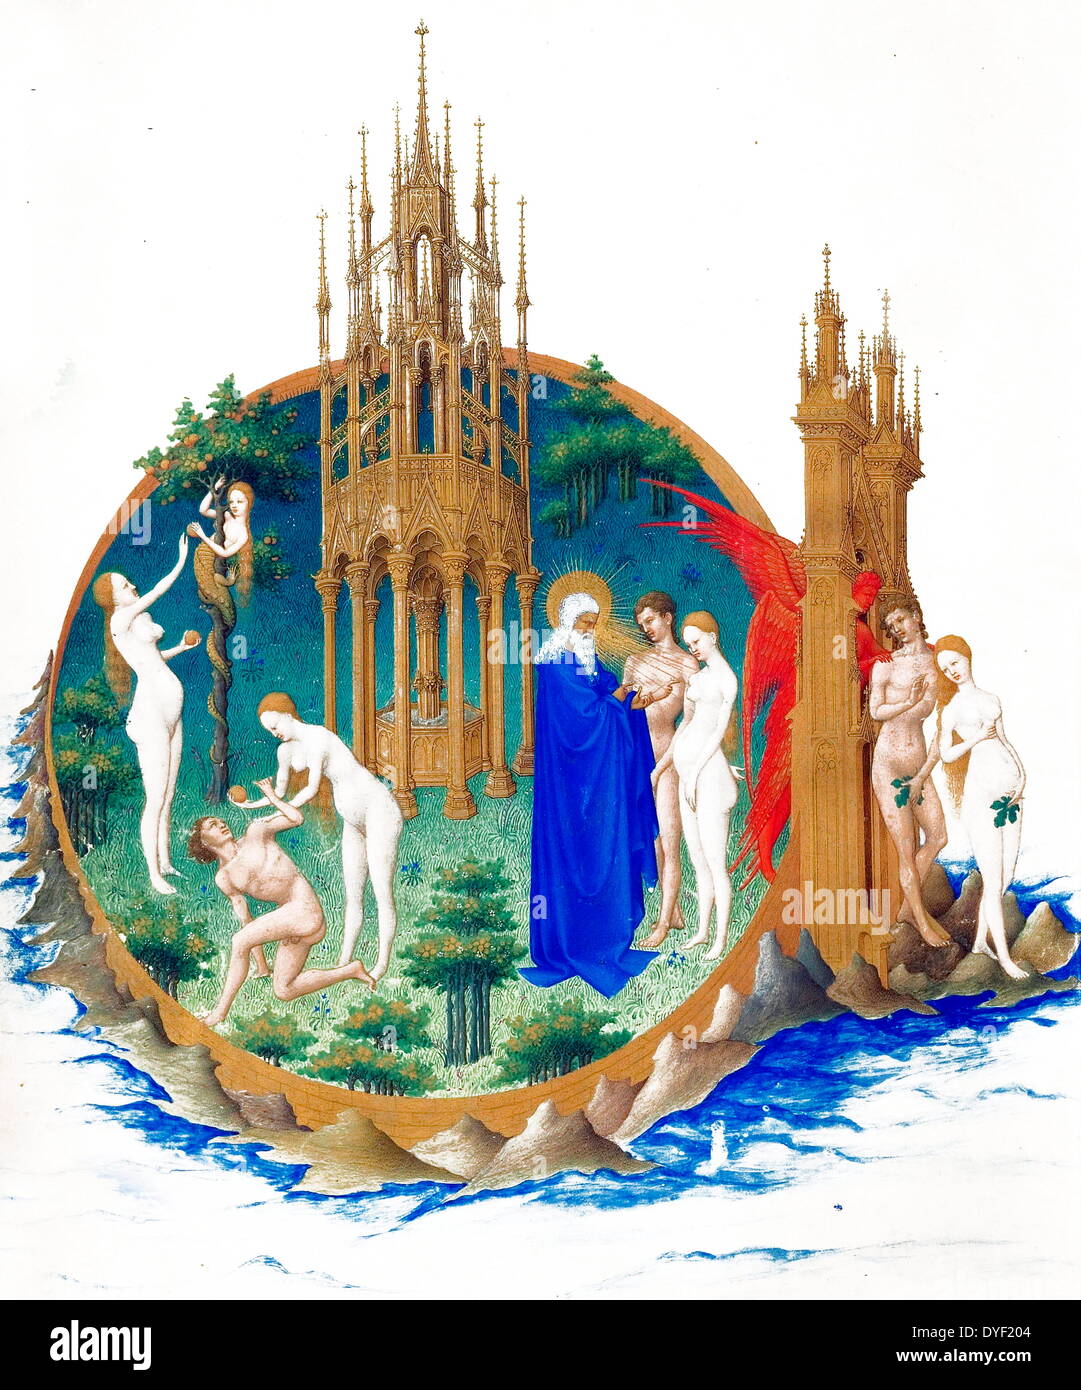 Page from the calendar of the Très Riches Heures showing 'The Garden of Eden'. The Très Riches Heures is a French Gothic manuscript illumination with beautiful illustrations of prayers and canonical scenes from the Bible. Created by the Limbourg brothers between 1412-1416. Tempera on vellum. Stock Photo